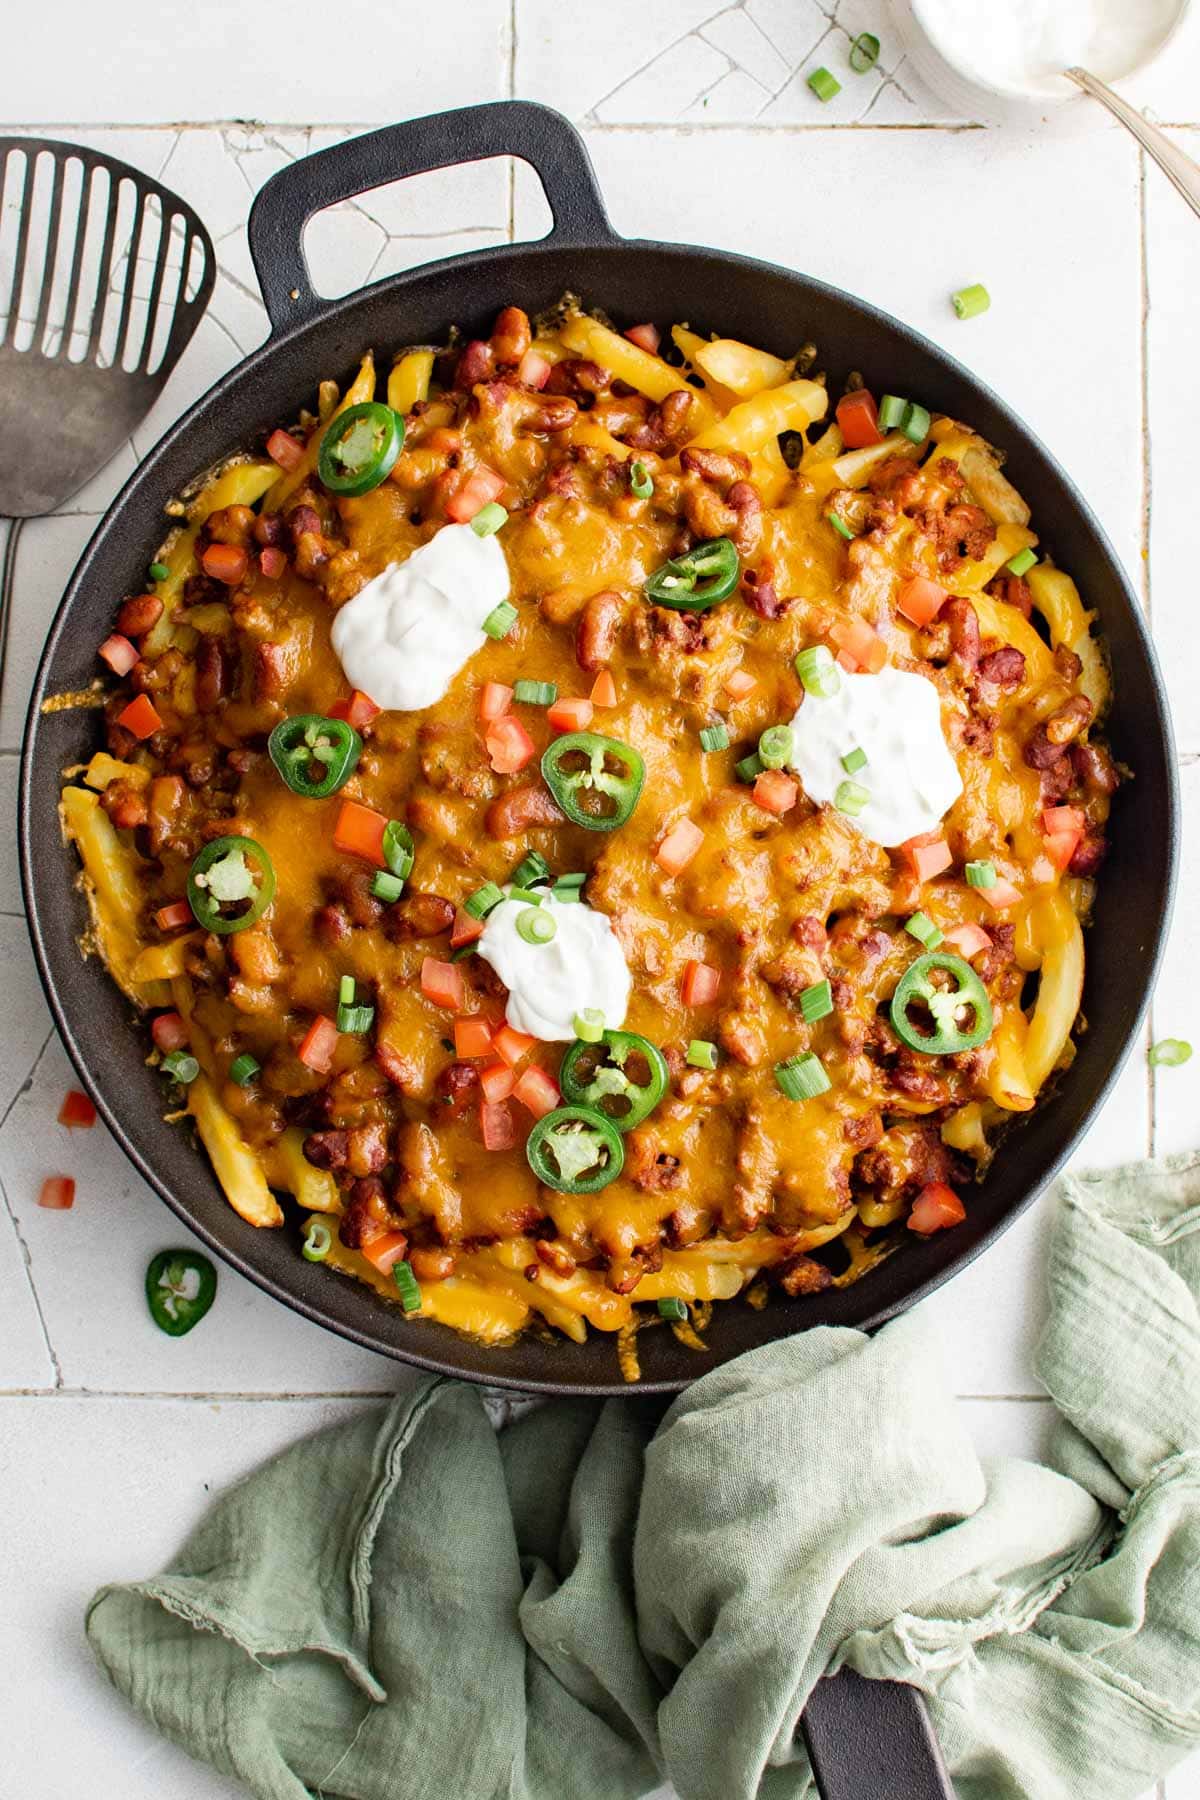 Loaded Chili Cheese Fries